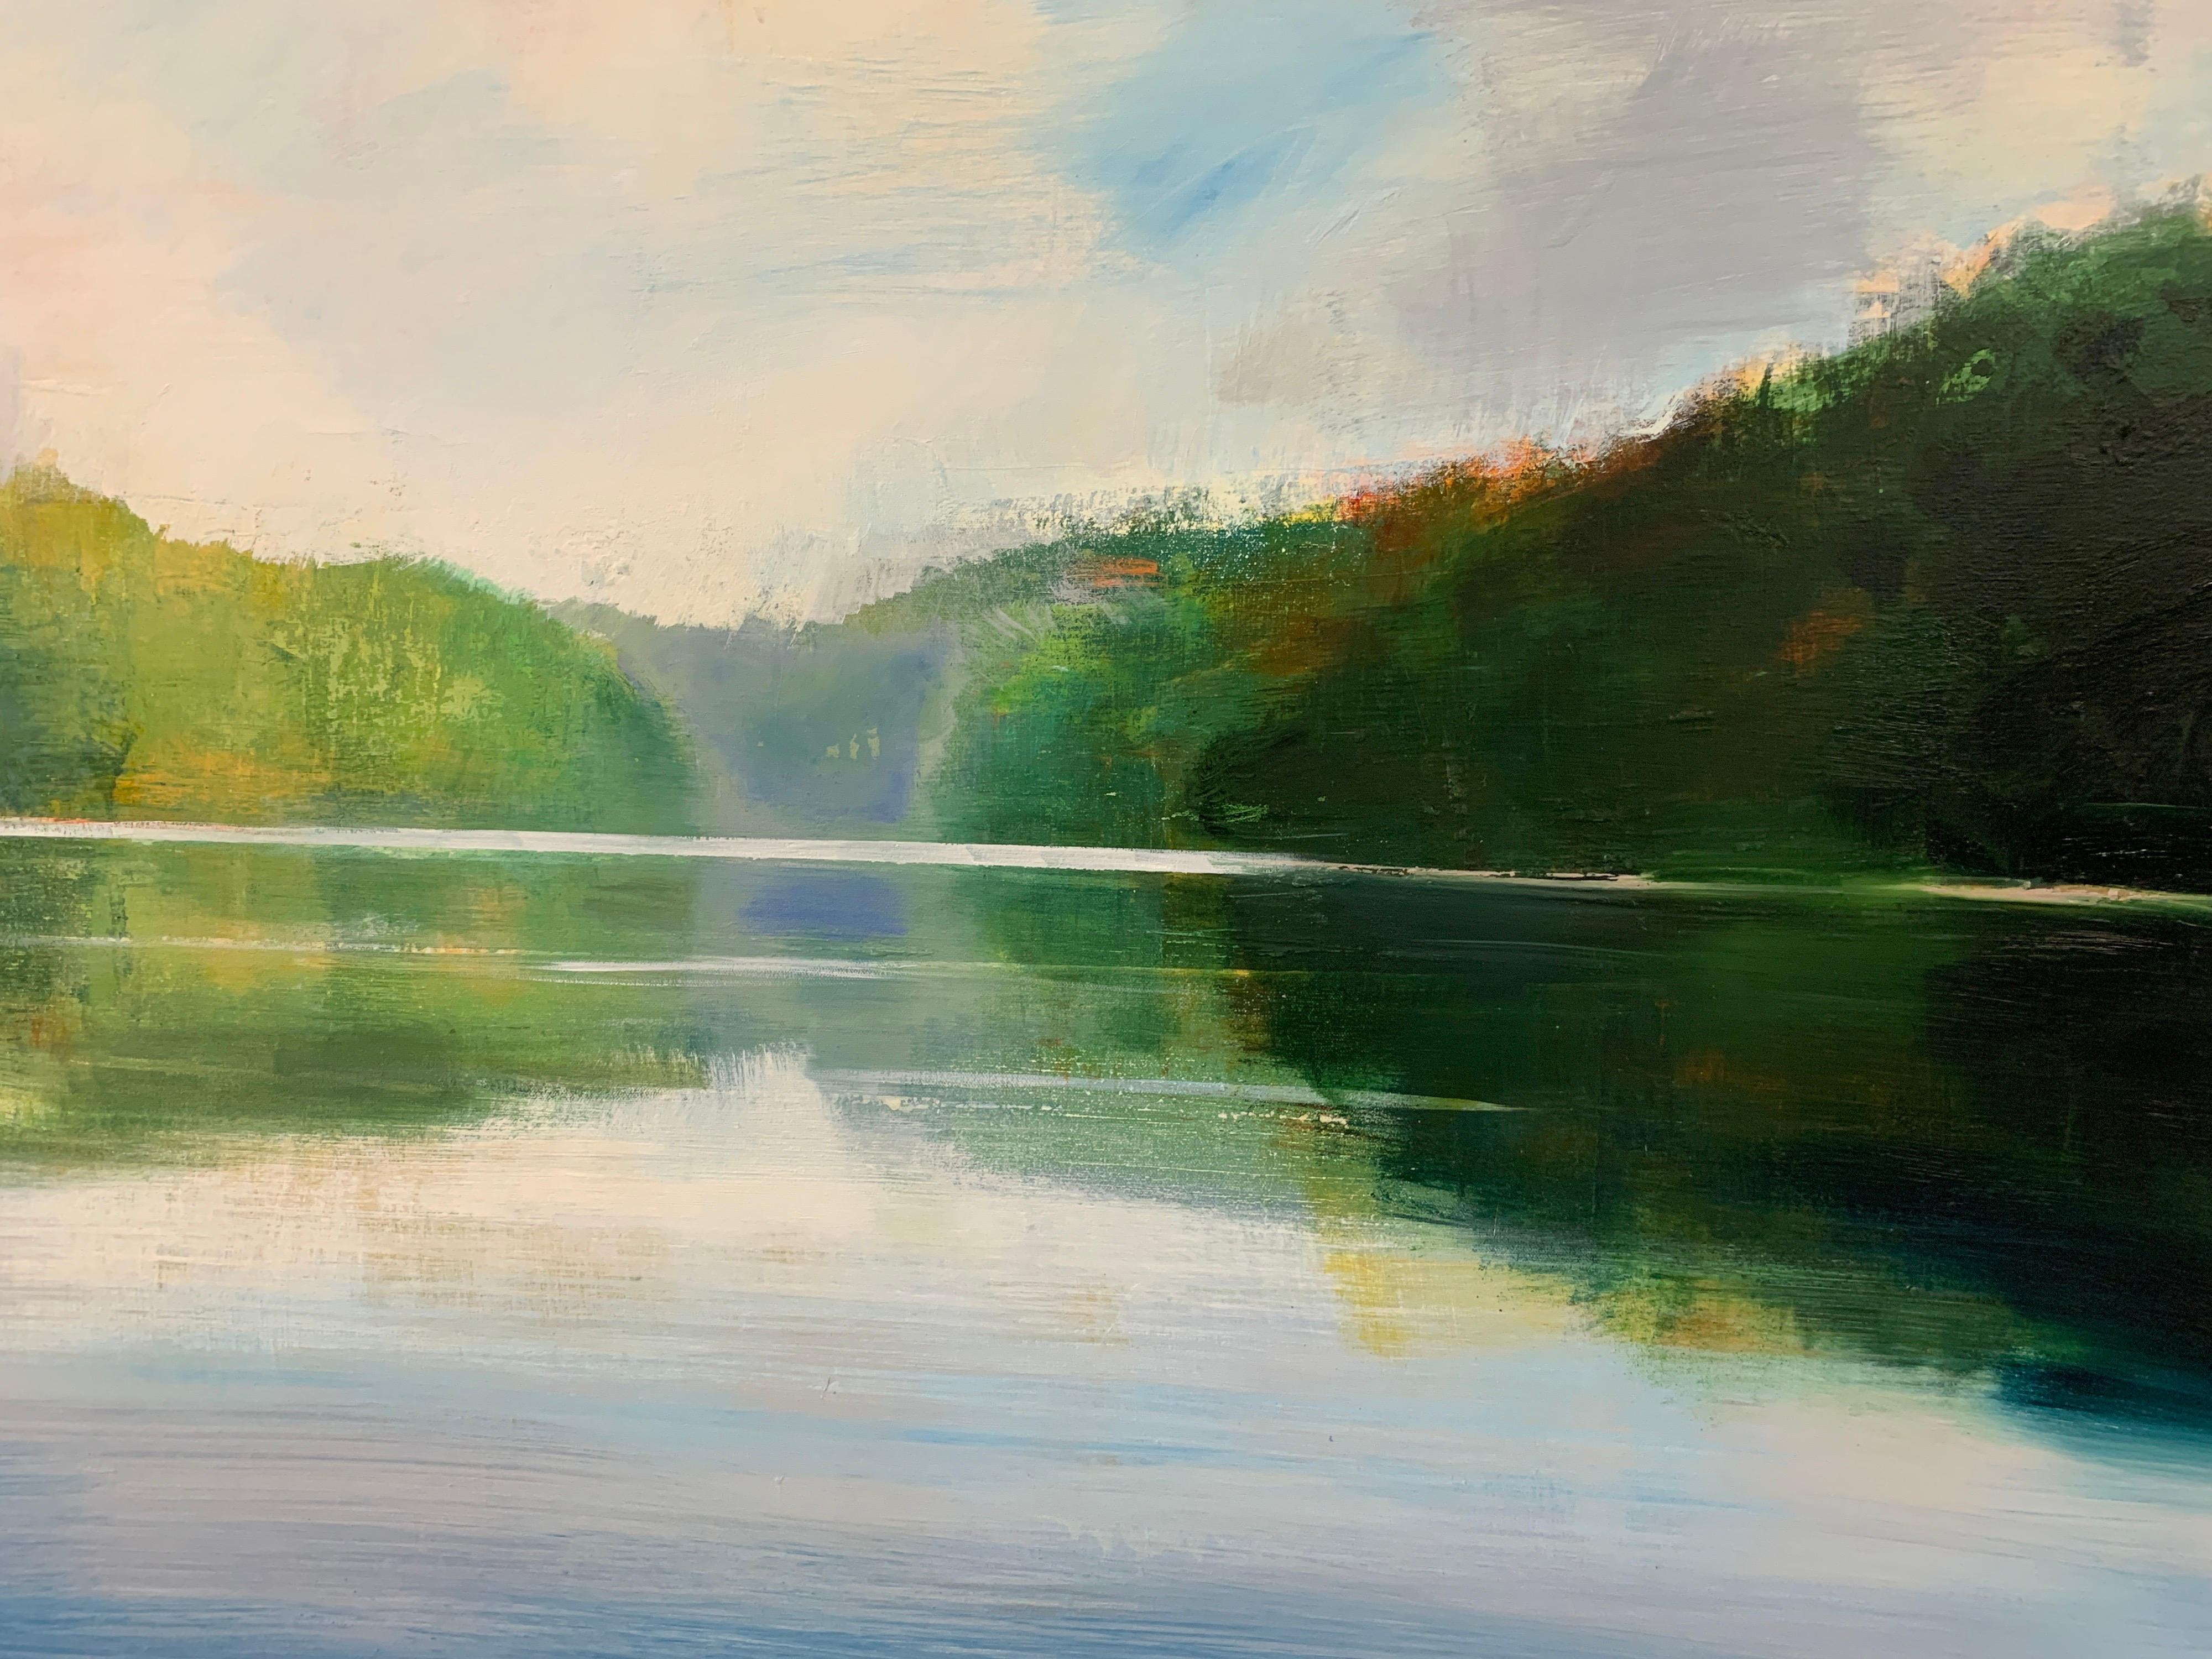 River Reflection by Craig Mooney, Large Contemporary Landscape Oil Painting 2